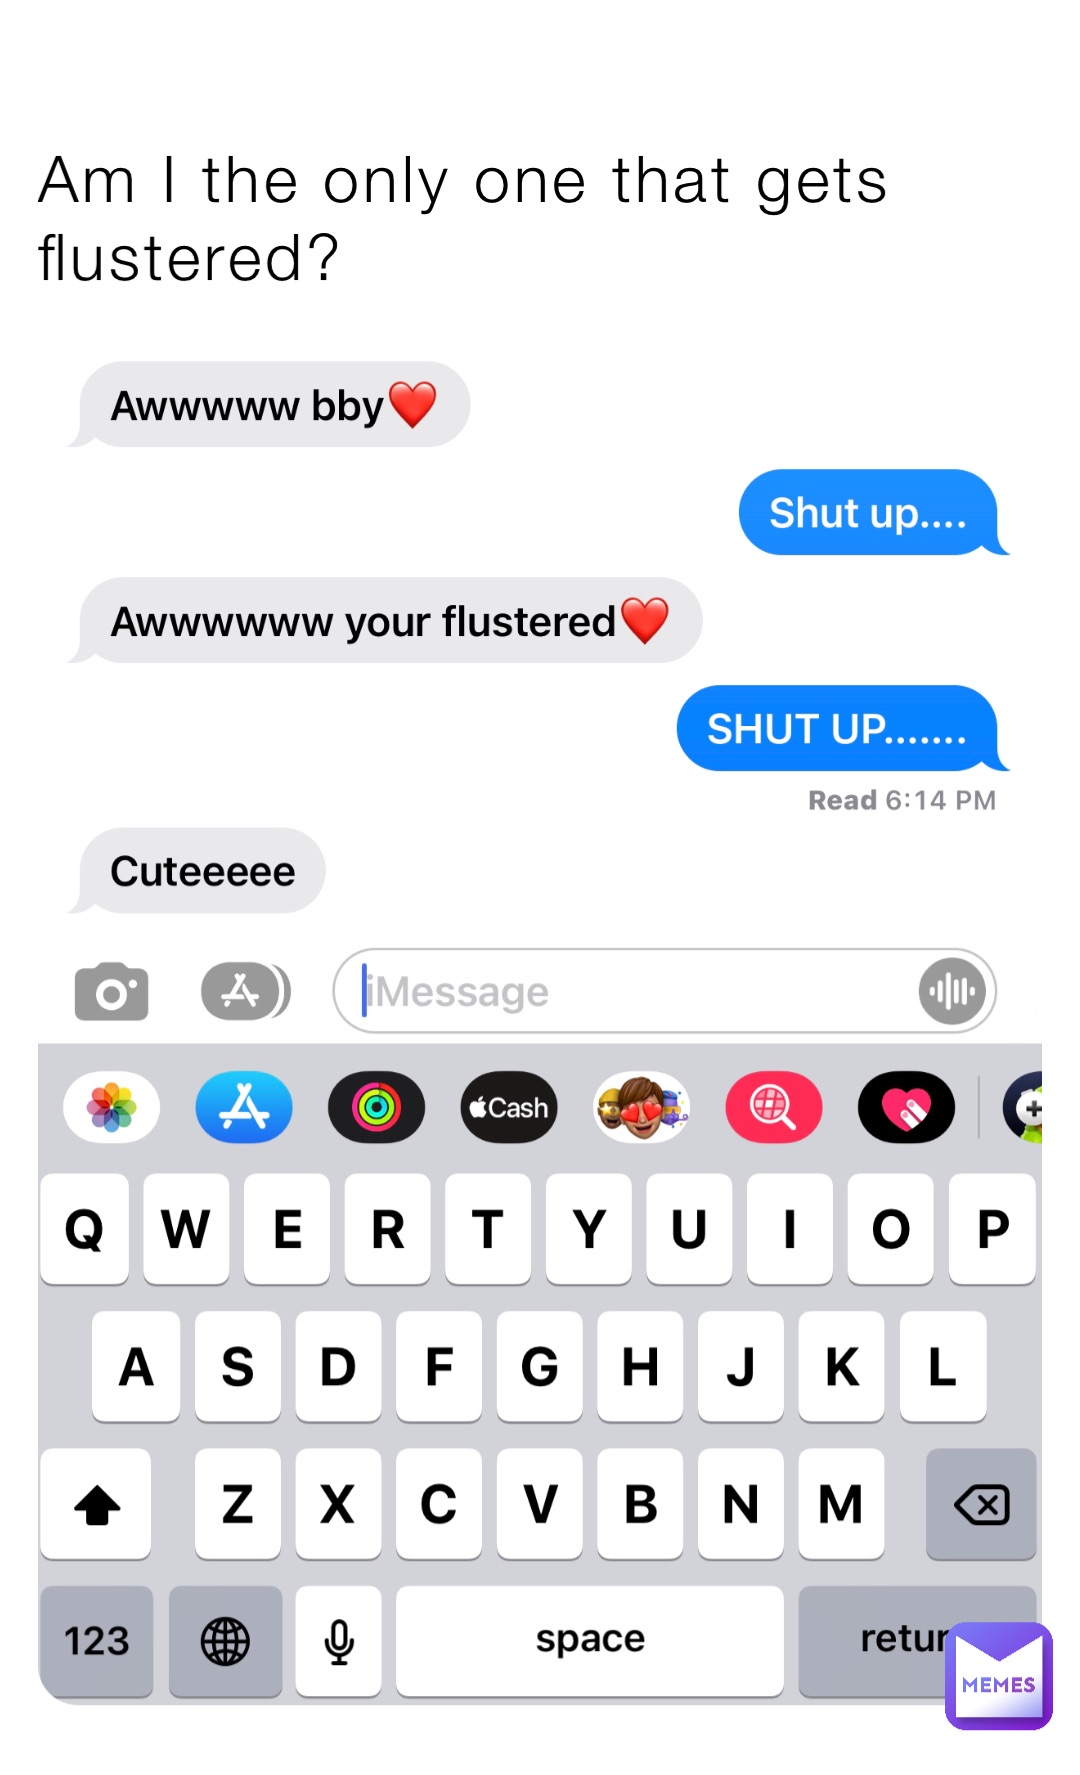 Am I the only one that gets flustered?